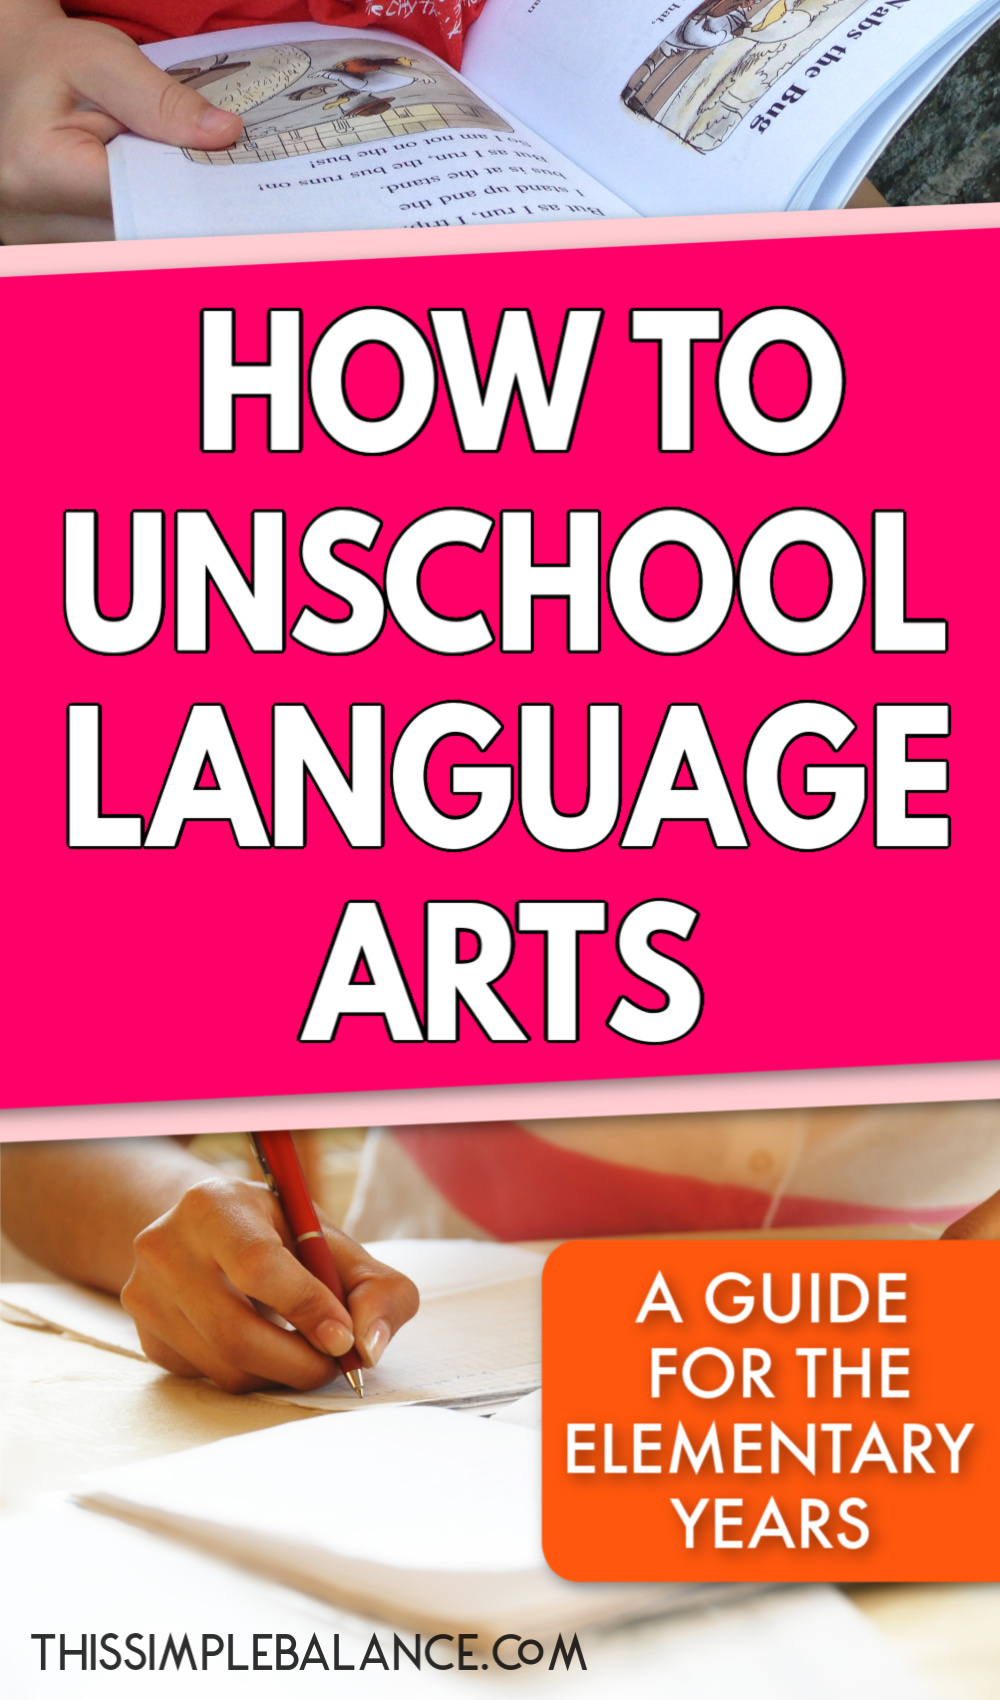 child looking at book, woman writing on paper, with text overlay, "how to unschool language arts - a guide for the elementary years"